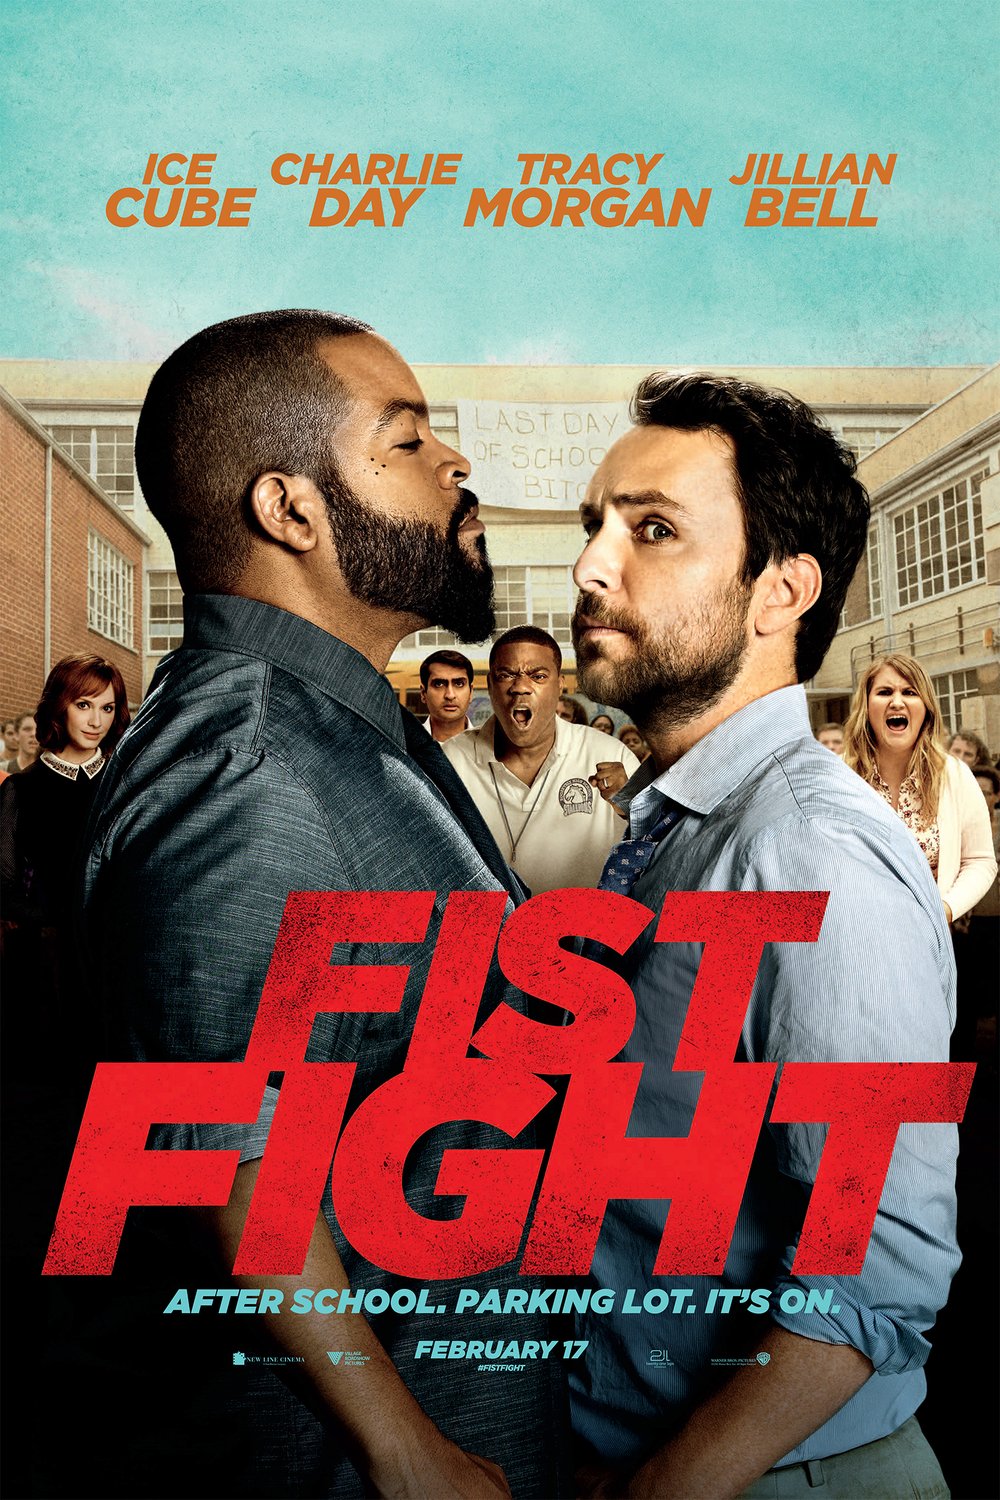 Poster of the movie Fist Fight